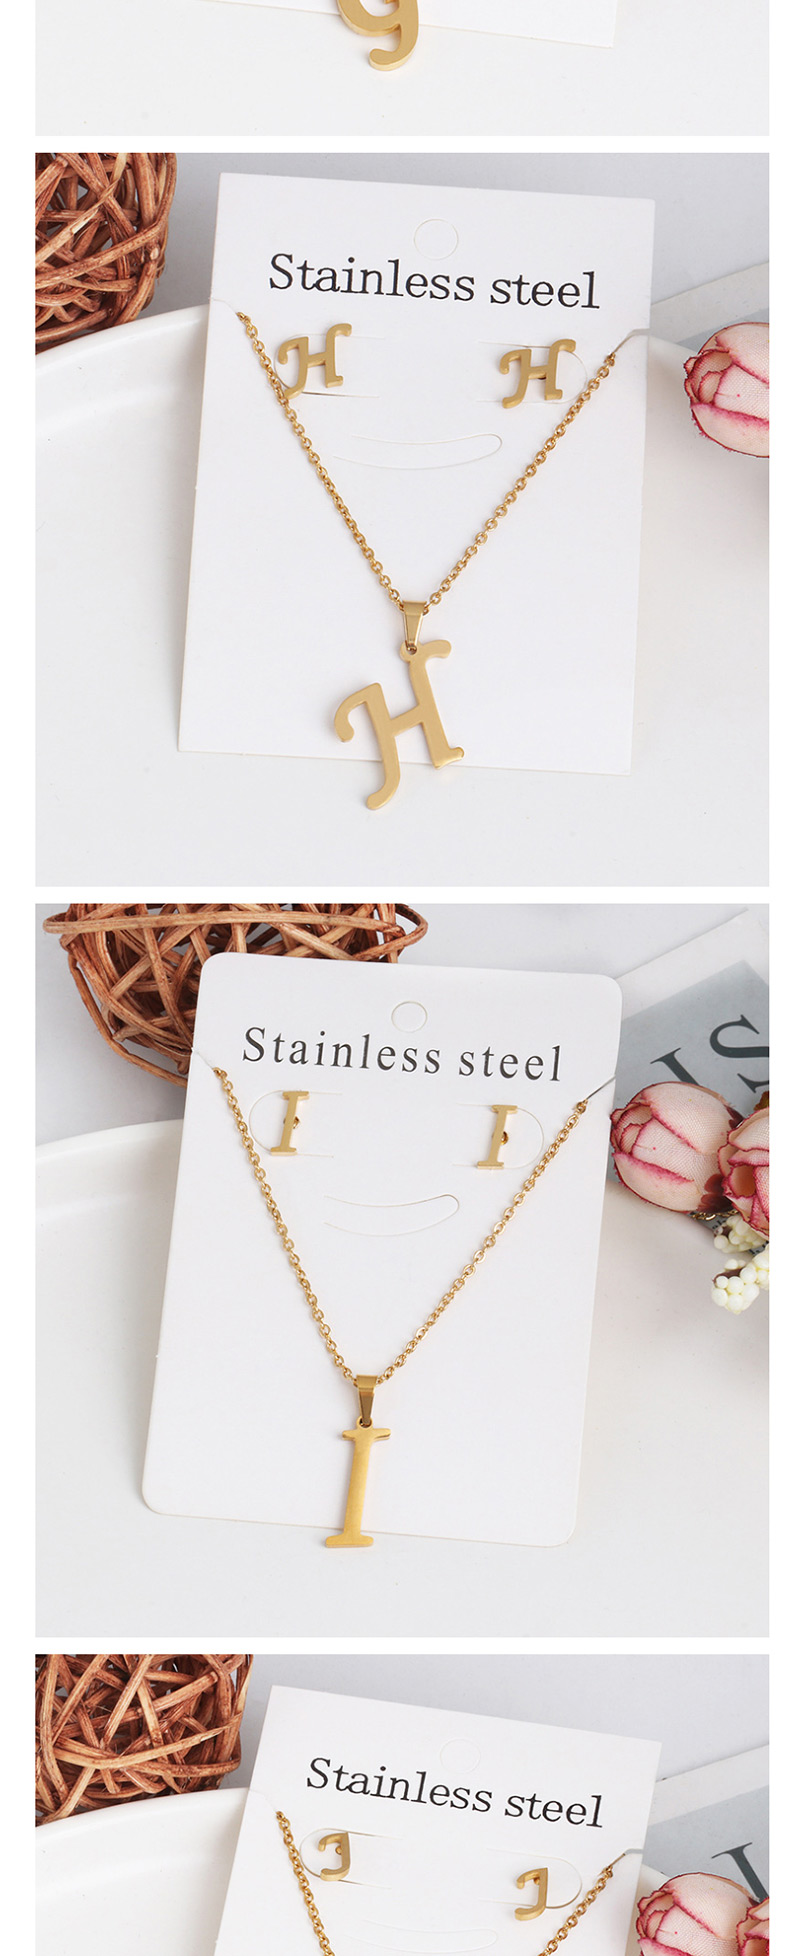 Fashion Z Gold Stainless Steel Letter Necklace Earrings Two-piece,Jewelry Sets